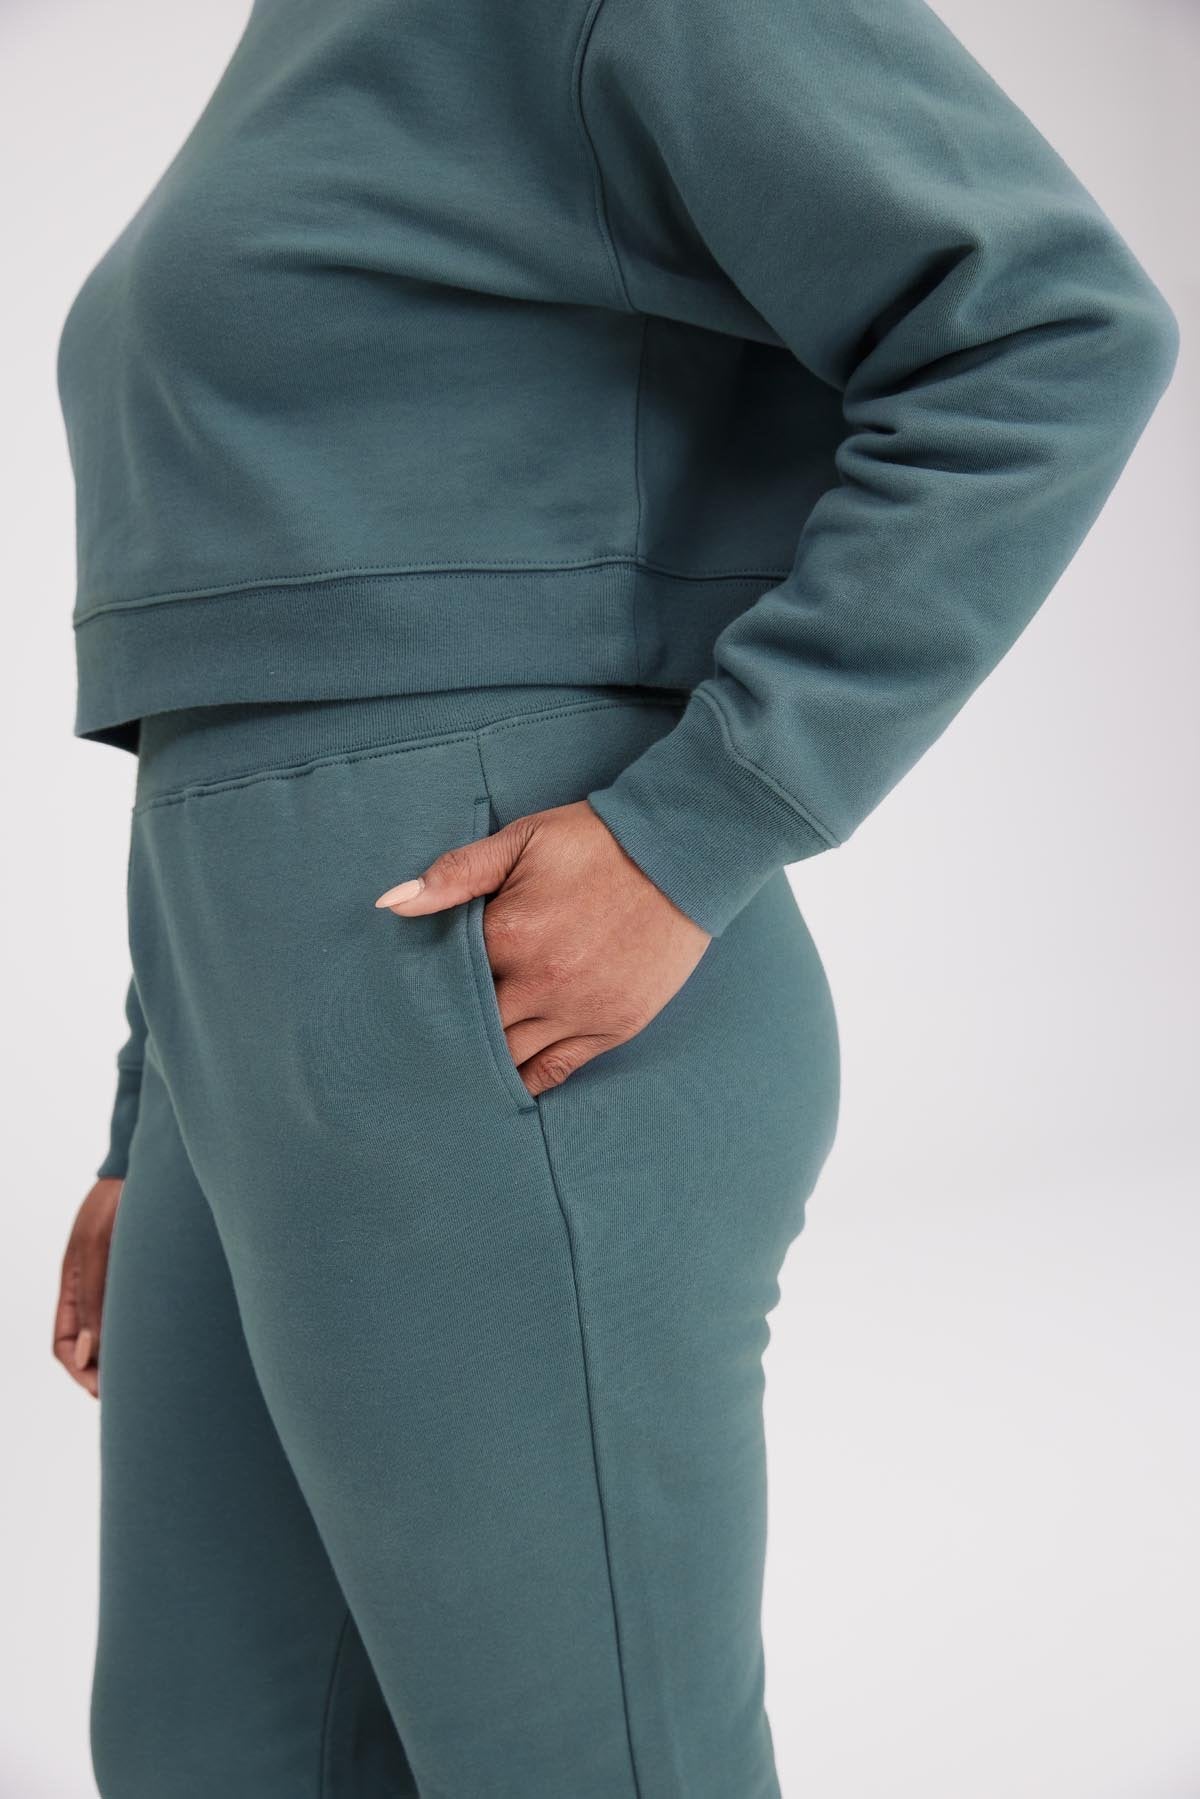 35 Pieces Of Clothing That Won’t Feel Uncomfortable When You’re Lounging